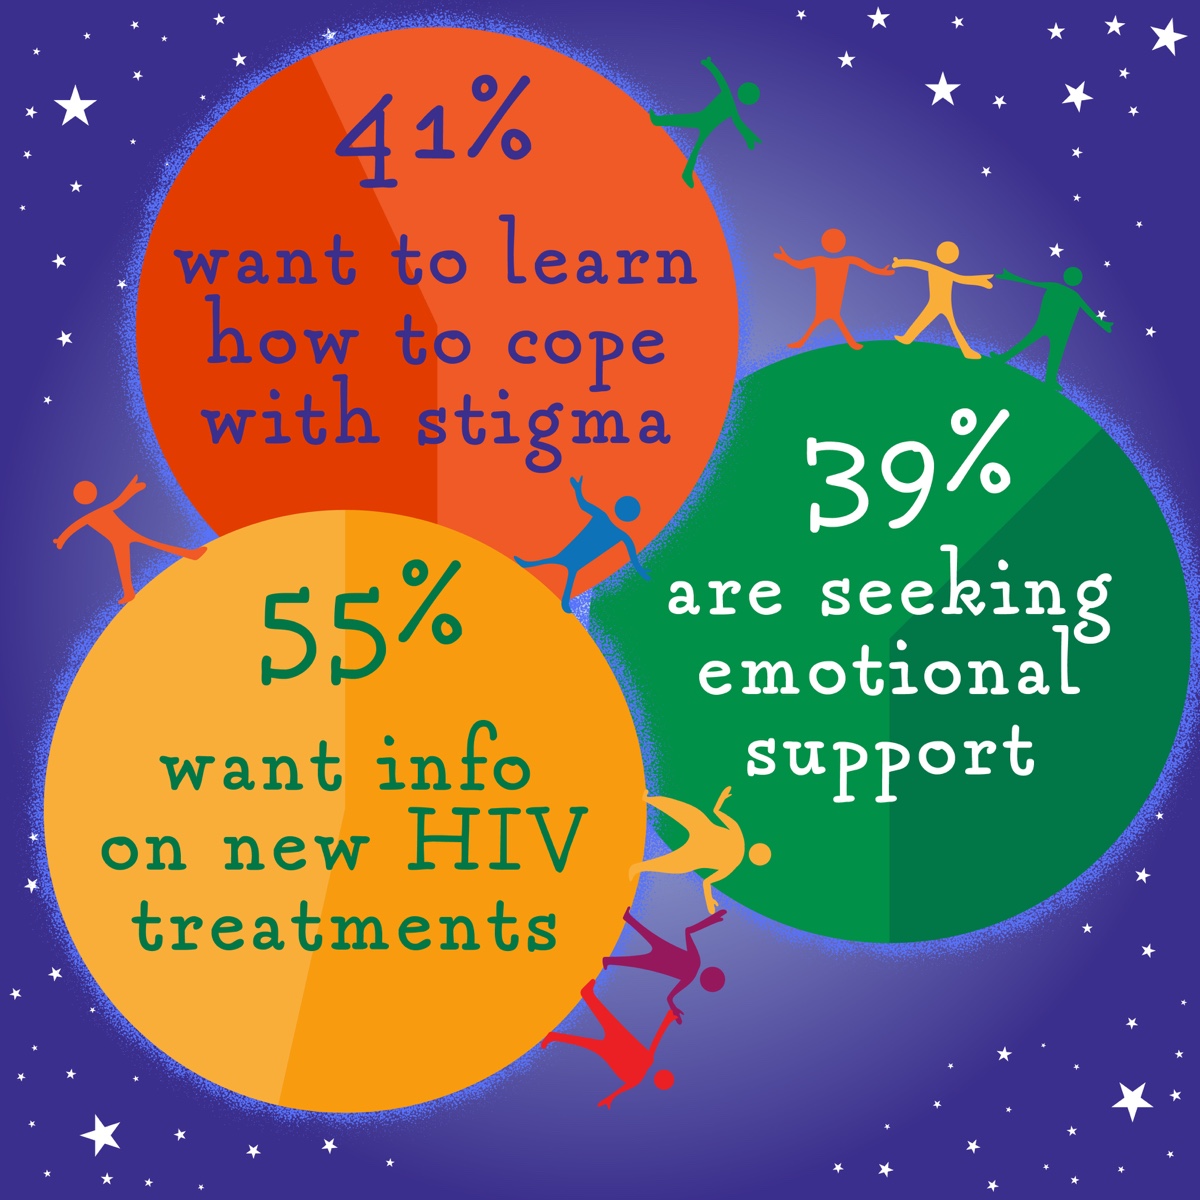 41% of people want to learn how to cope with stigma, 39% are seeking emotional support and 55% want info on new HIV treatments